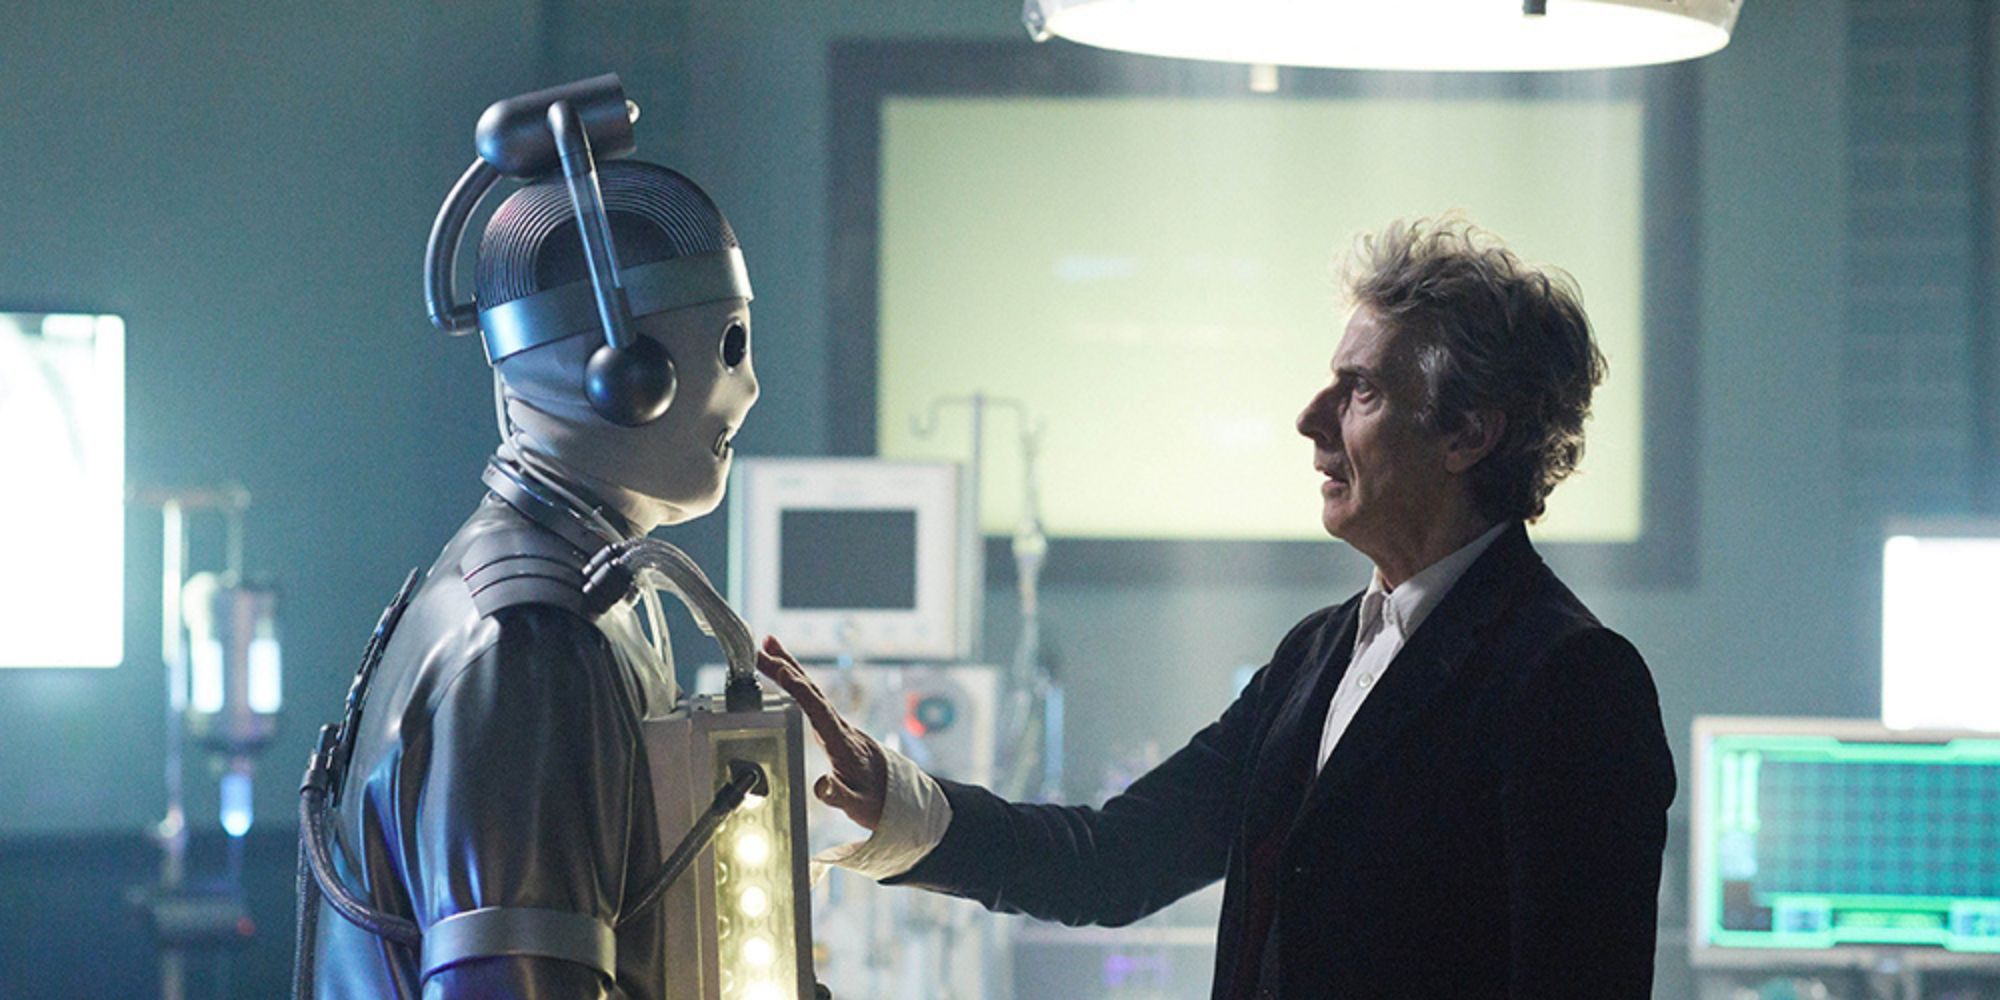 Doctor Who & Star Trek: TNG Teamed Up to Stop the Borg/Cybermen